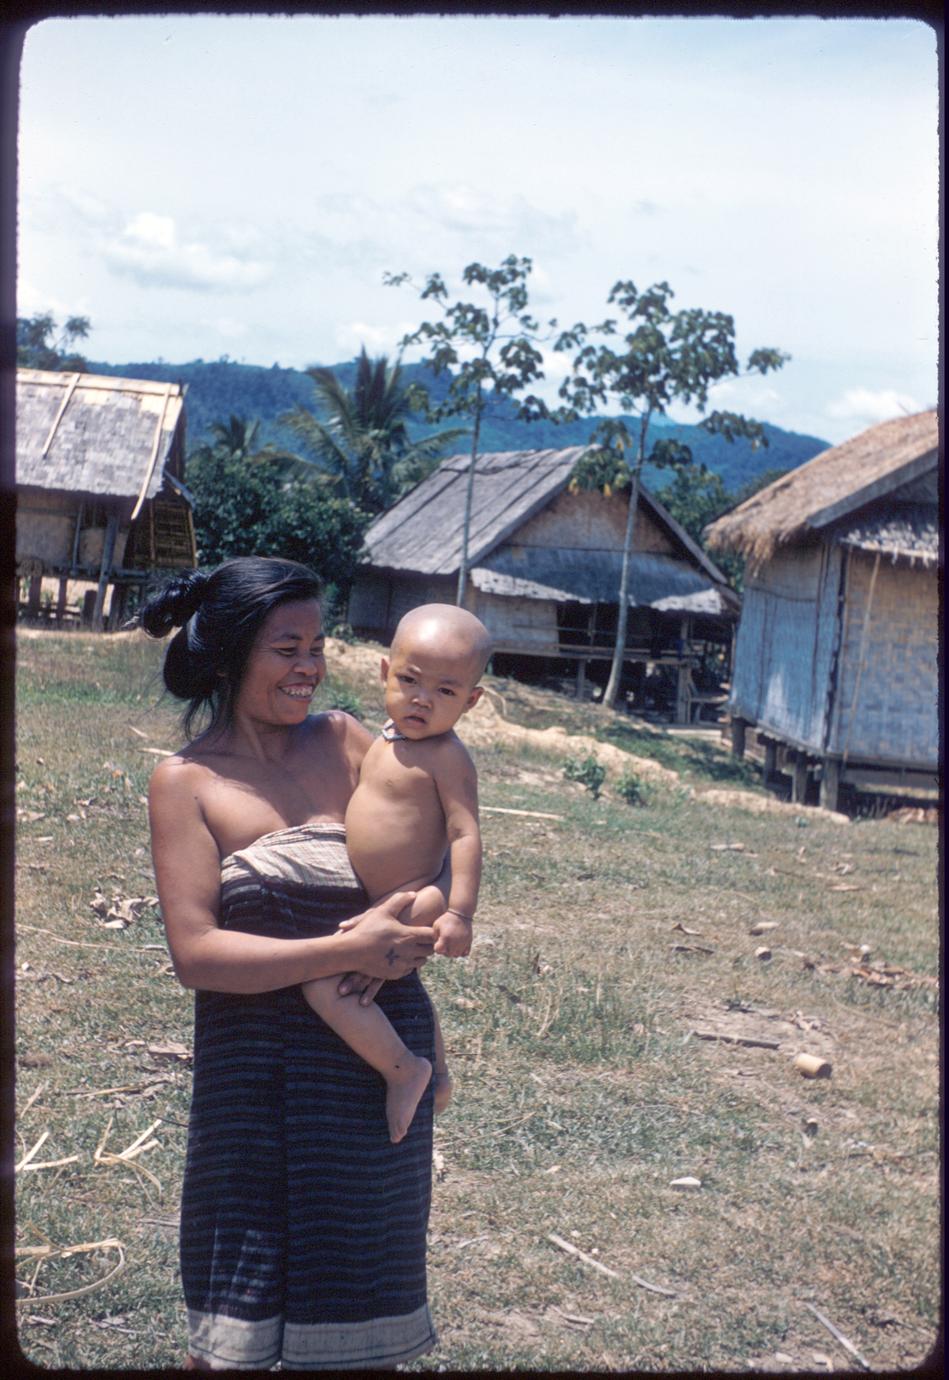 Lao mother and child near Kasy, houses in background